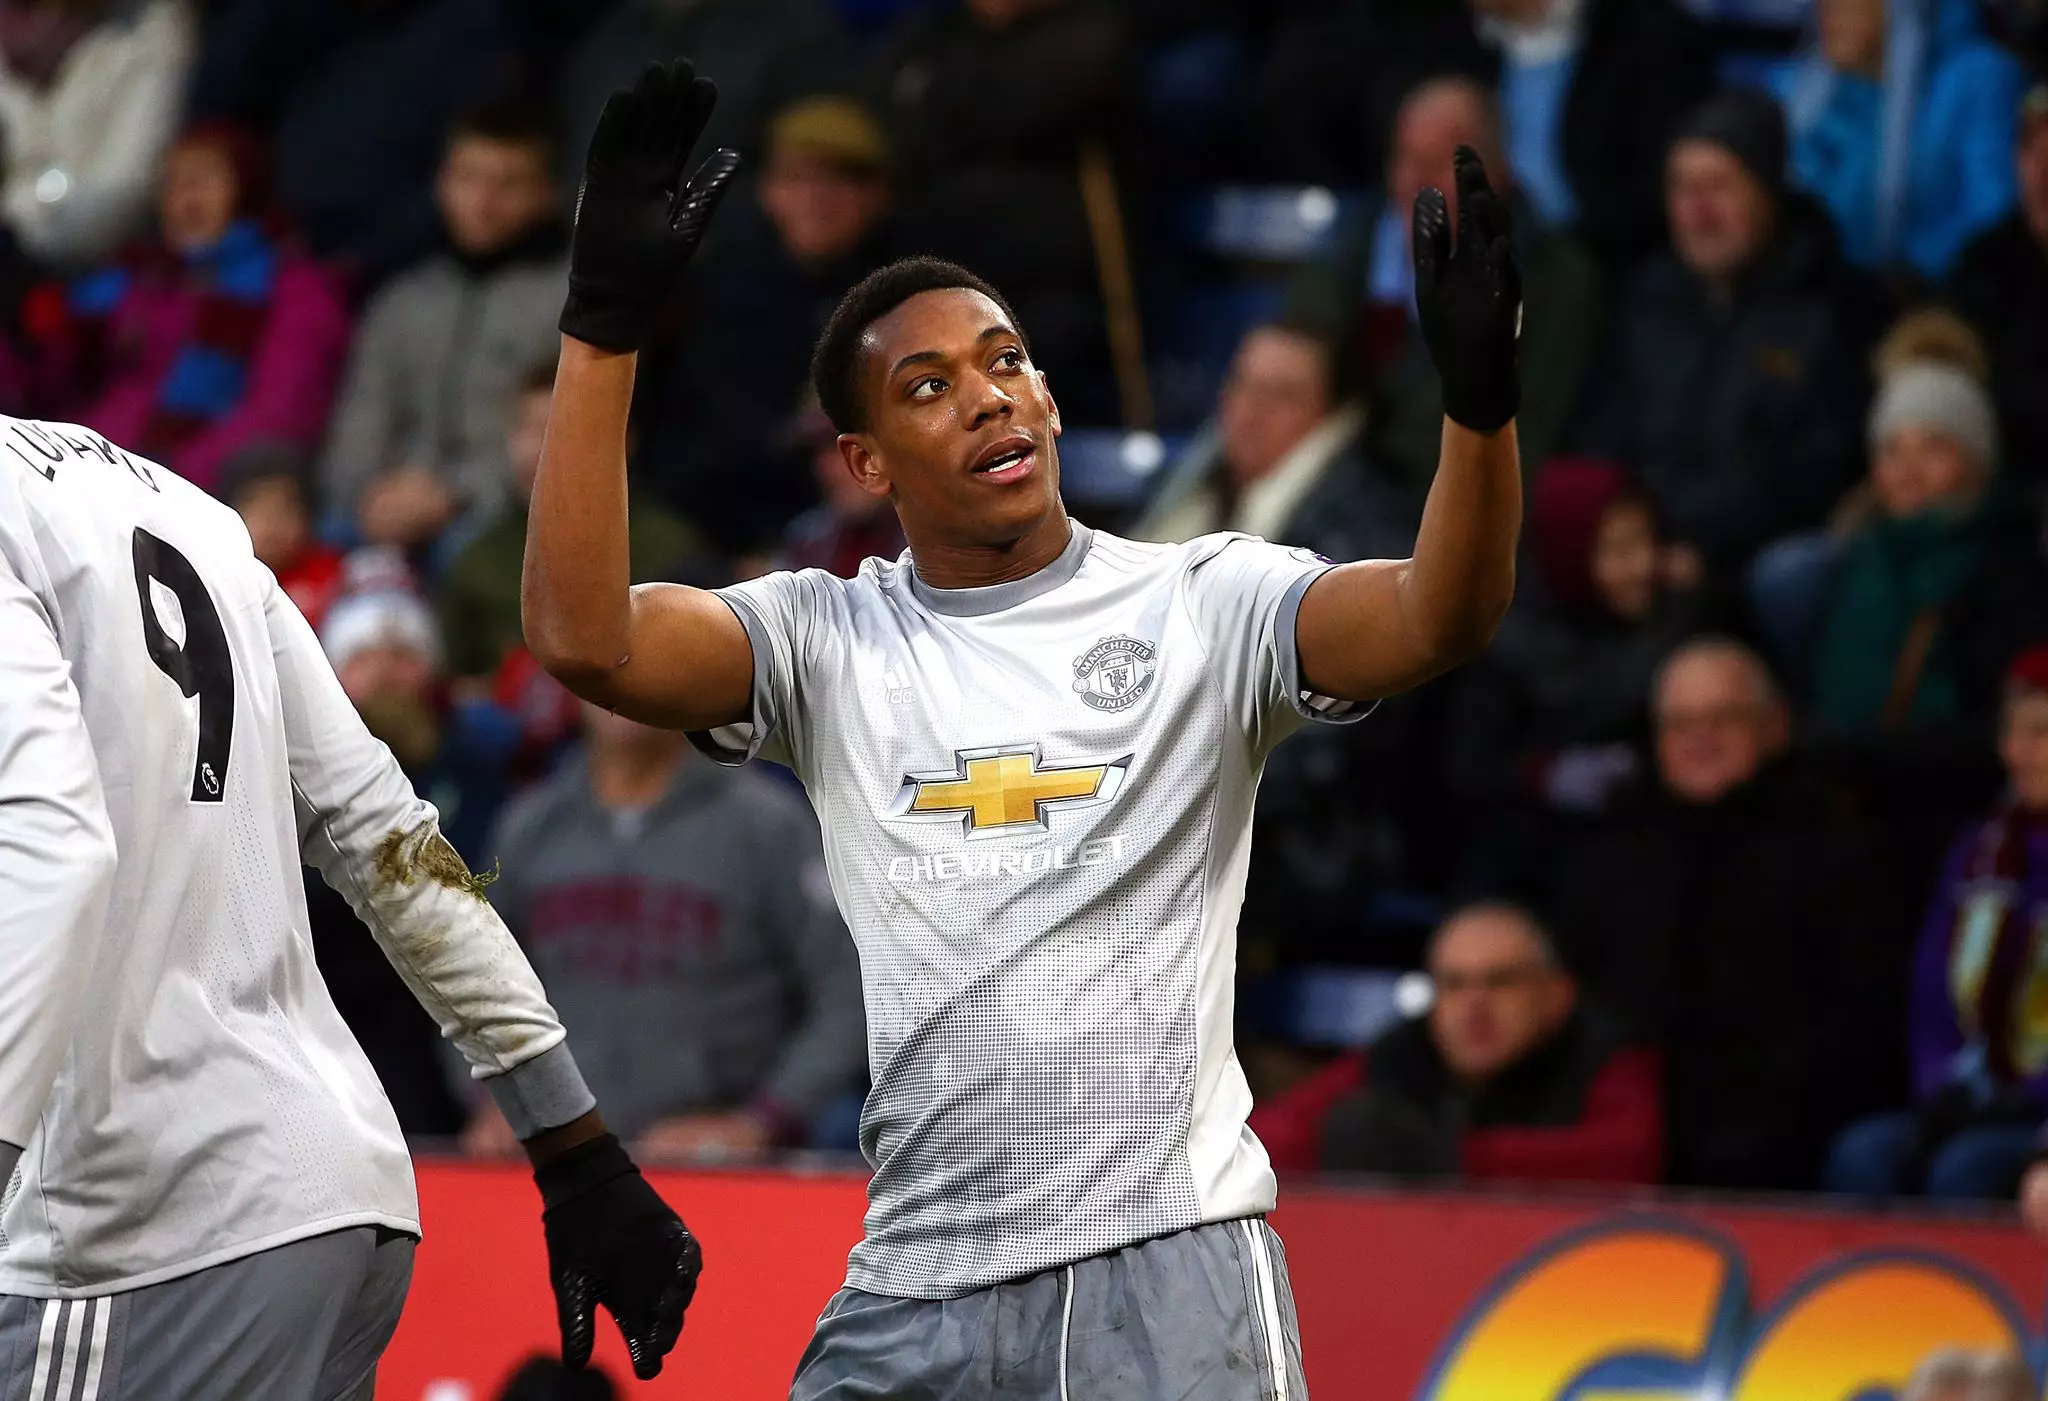 Martial has 11 goals in all competitions this season. Image: PA Images.